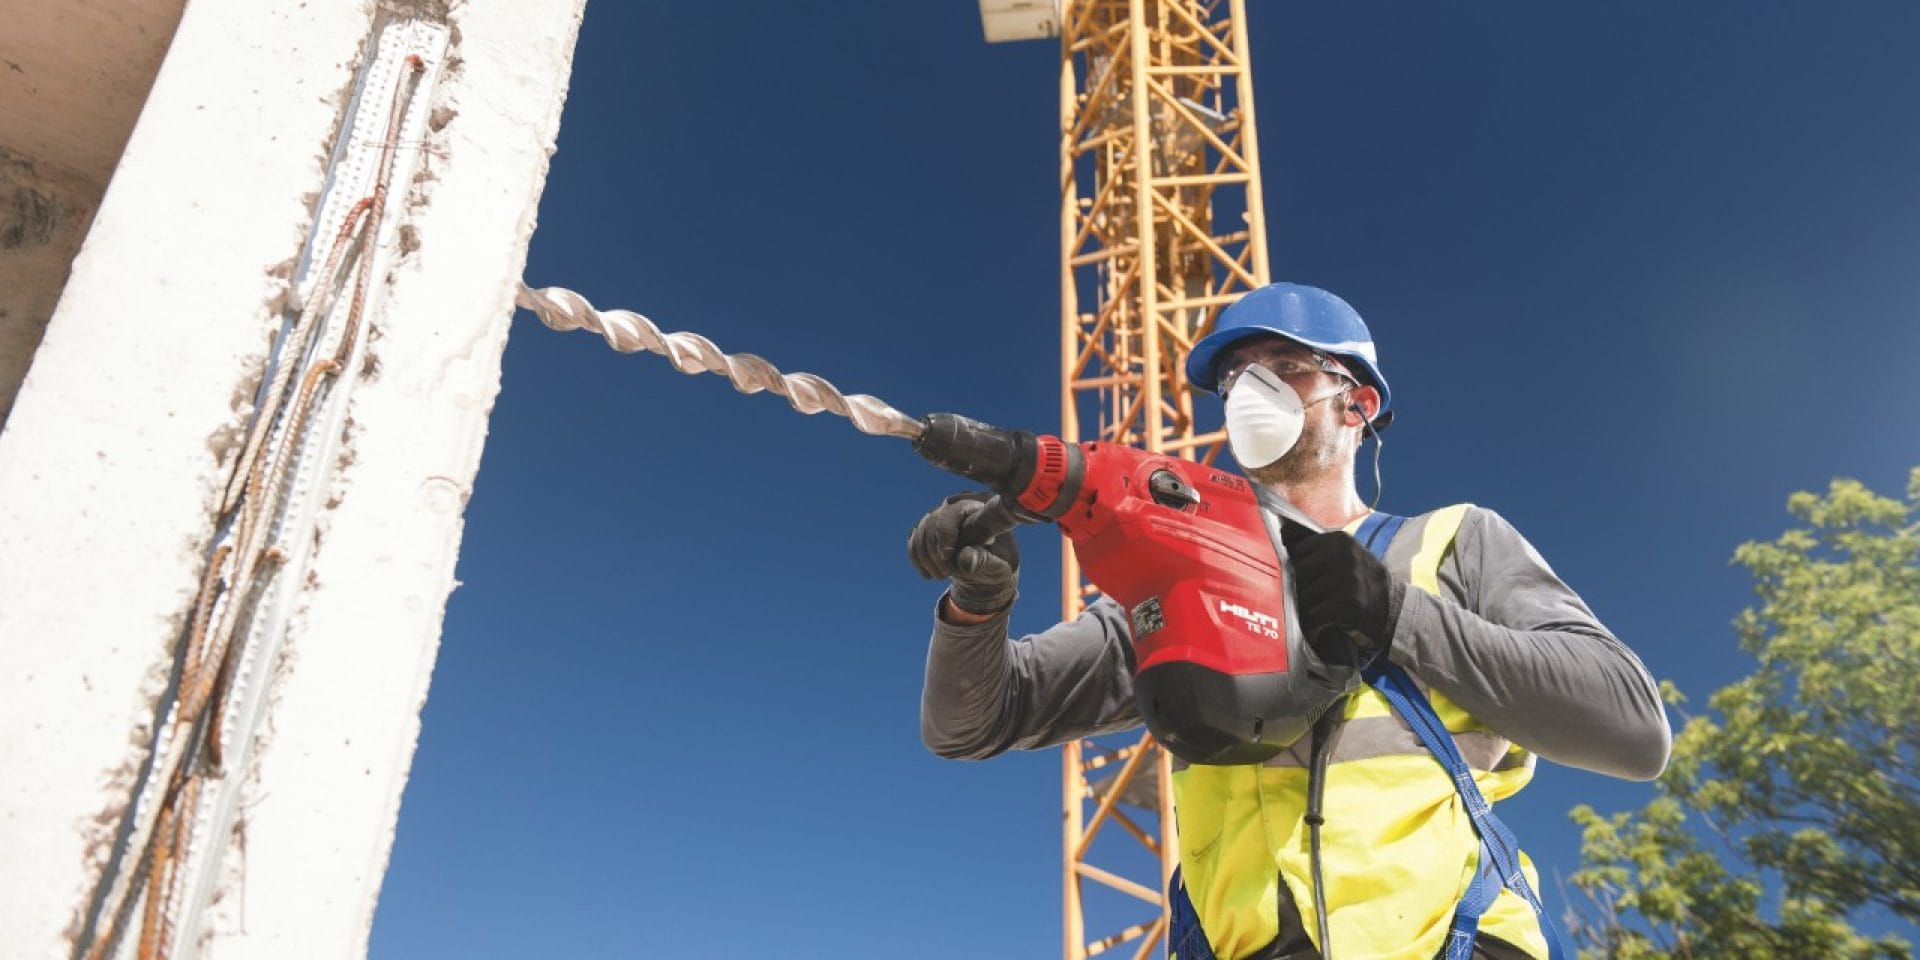 Our Hilti Drilling & Demolition Safety  Training gives you an overview of the  risks caused by using drilling and  demolition devices, and how to prevent  them.